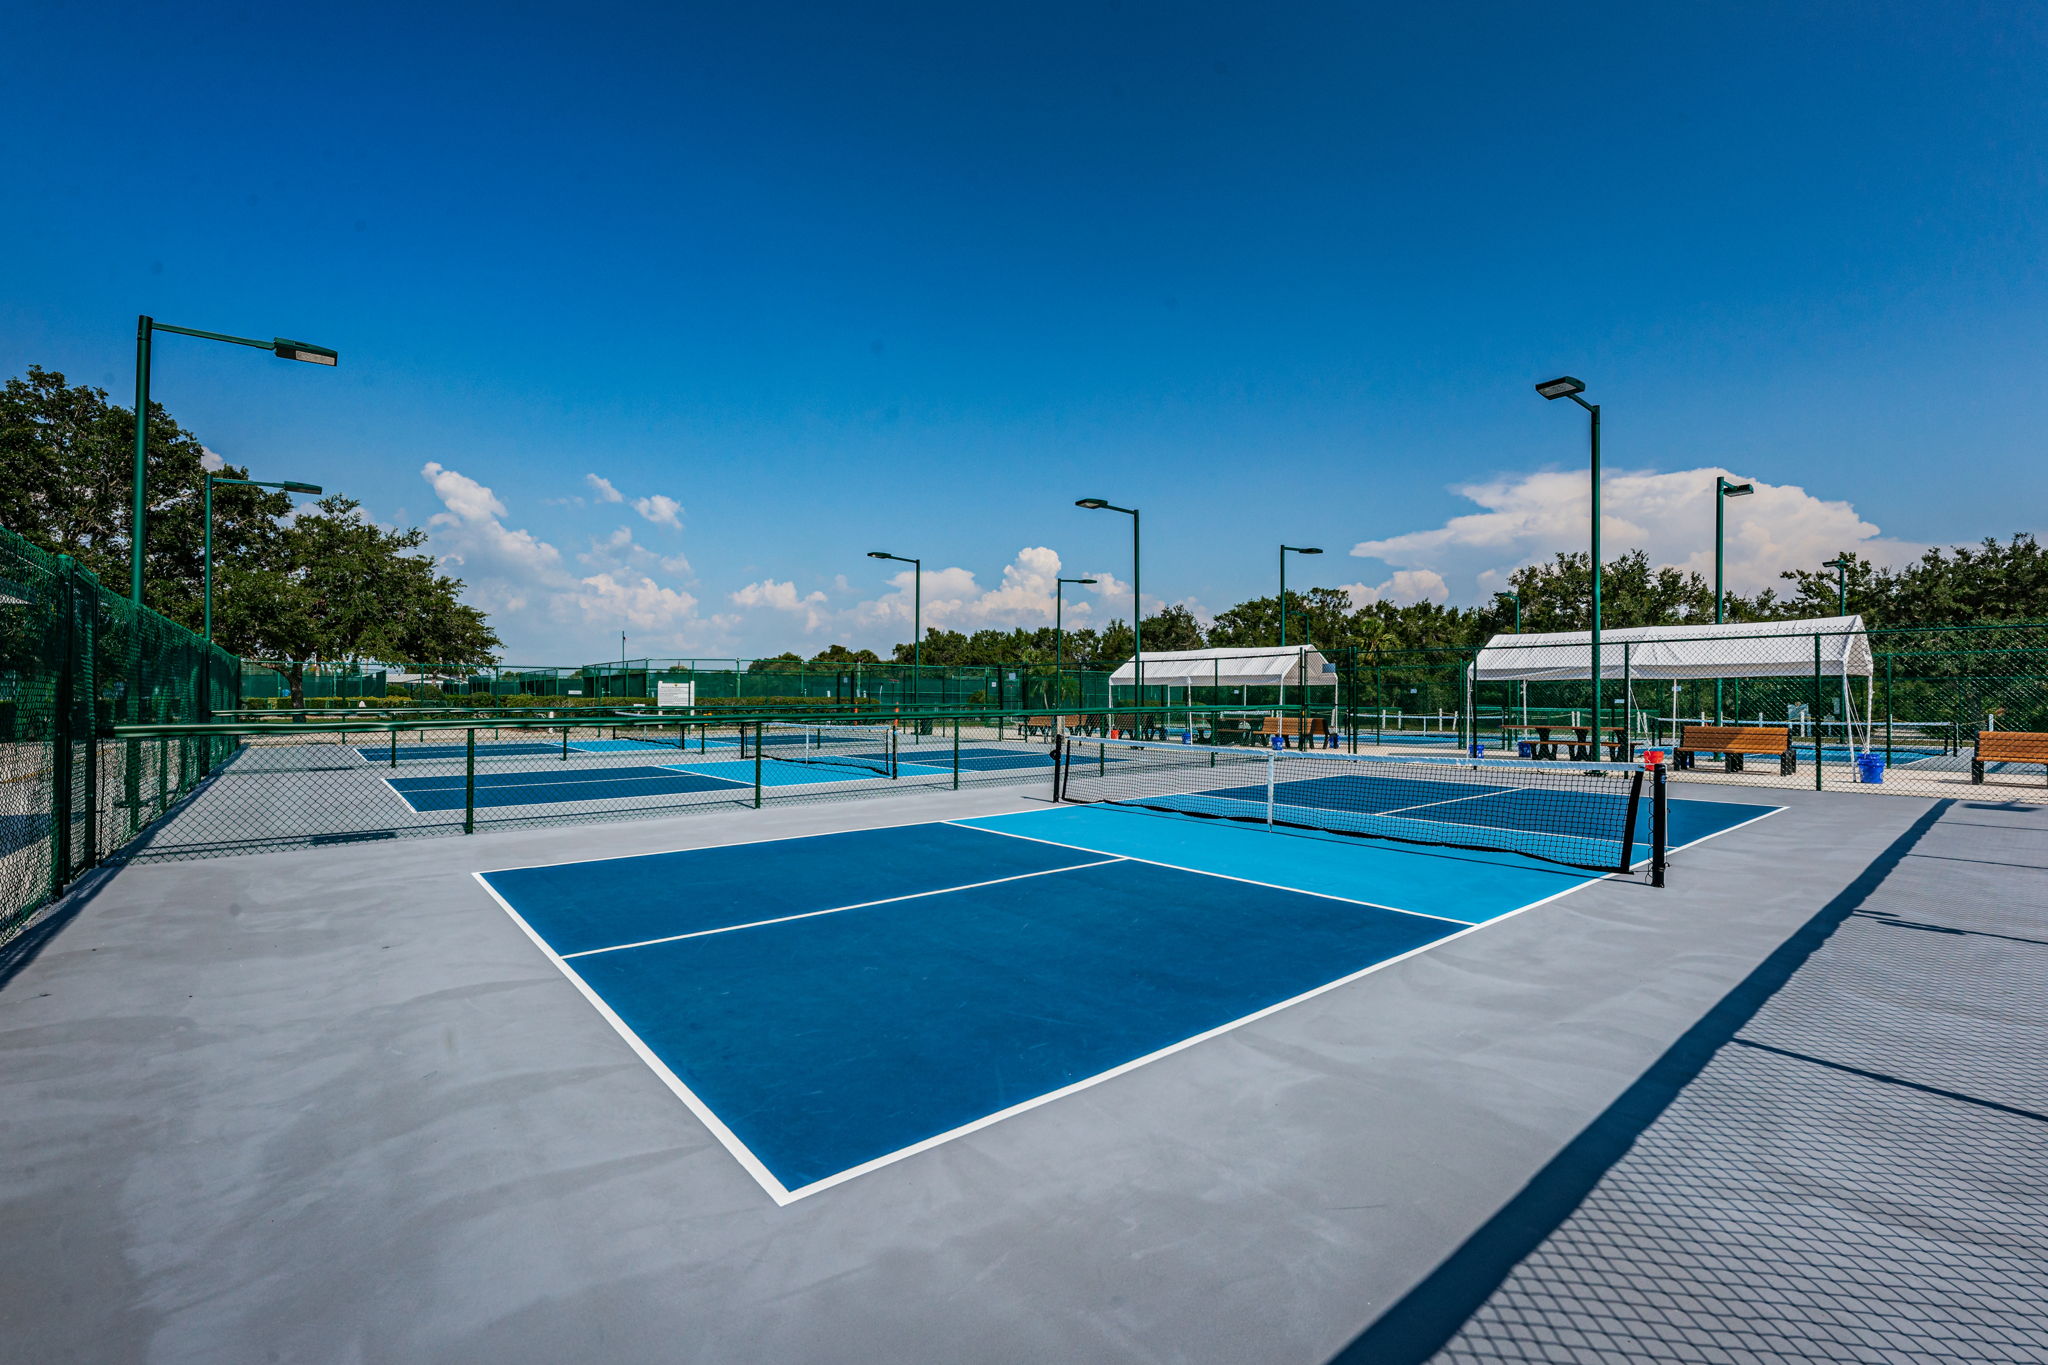 68-South Campus Pickleball Courts